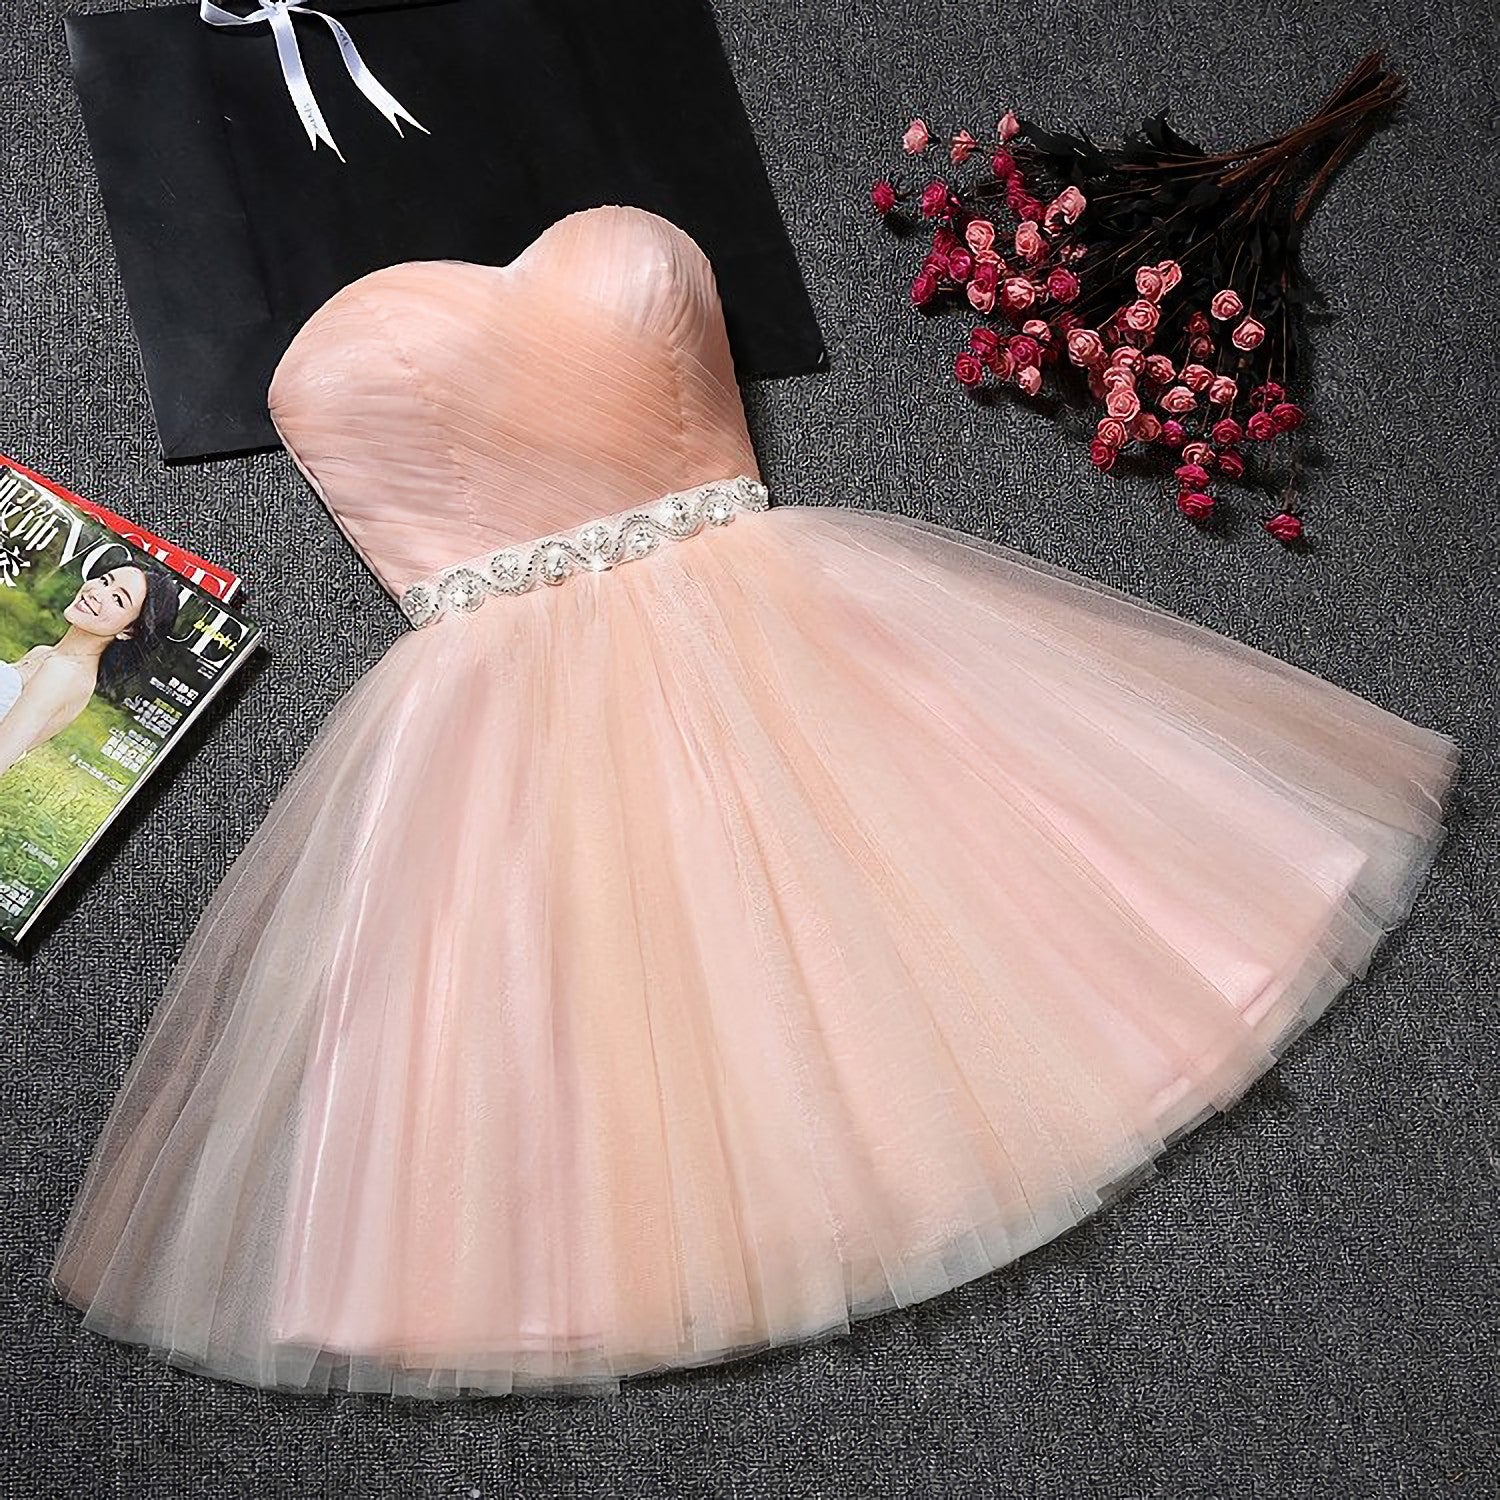 Prom Dresses Piece, Strapless Blush Pink Tulle Short With Sash Sweet 16 Cute Prom Dresses